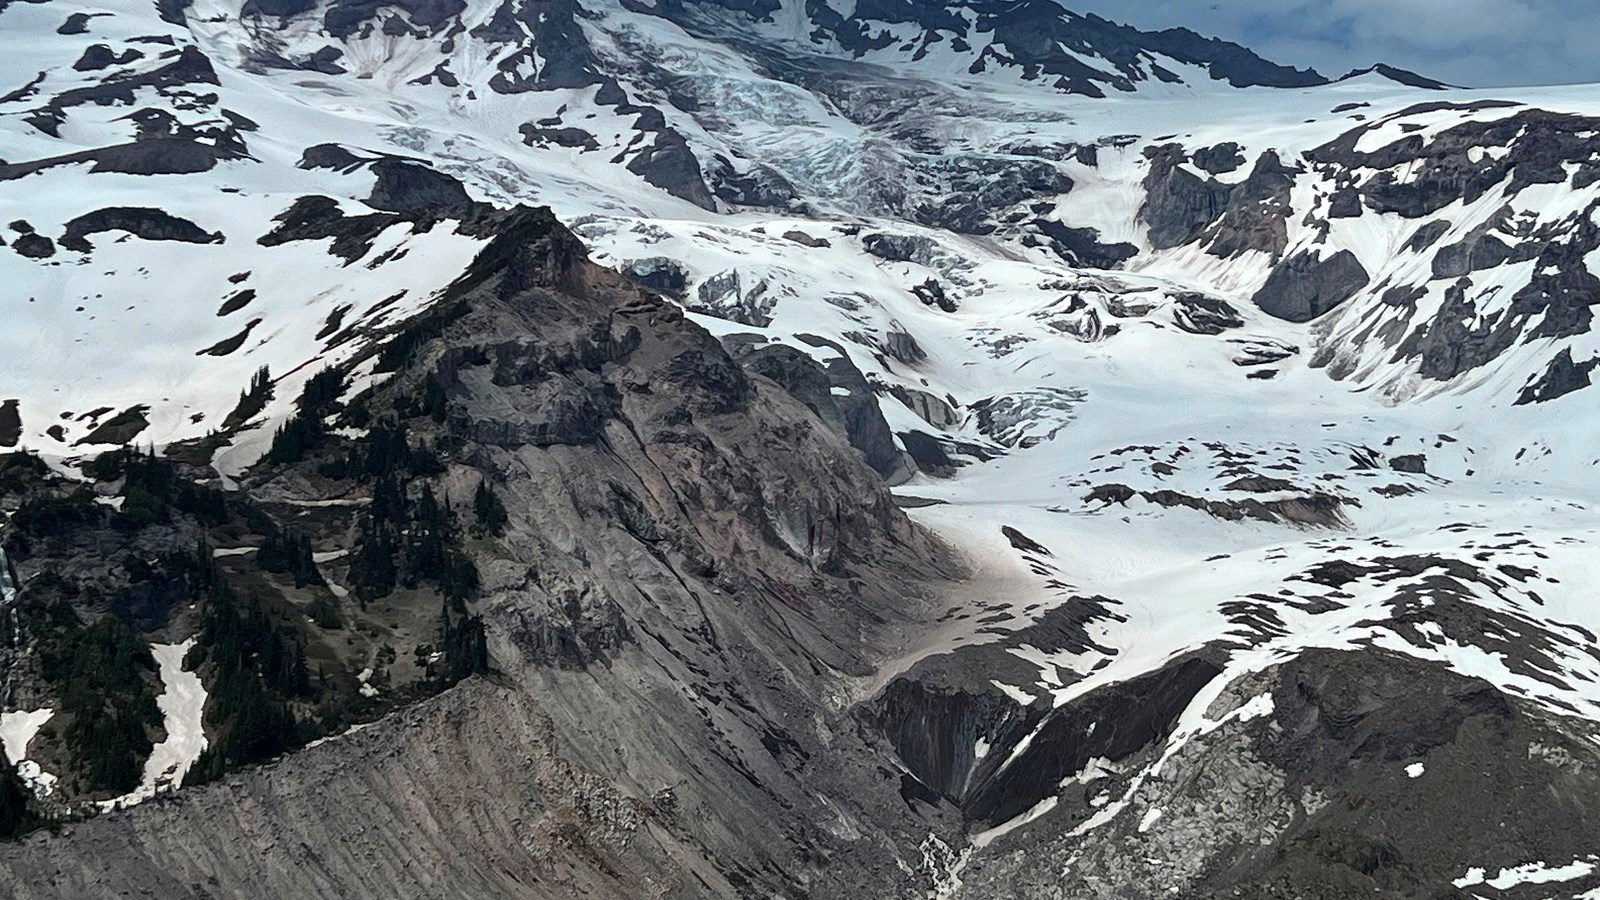 Retreating glacier on southwest side of mountain forming a river